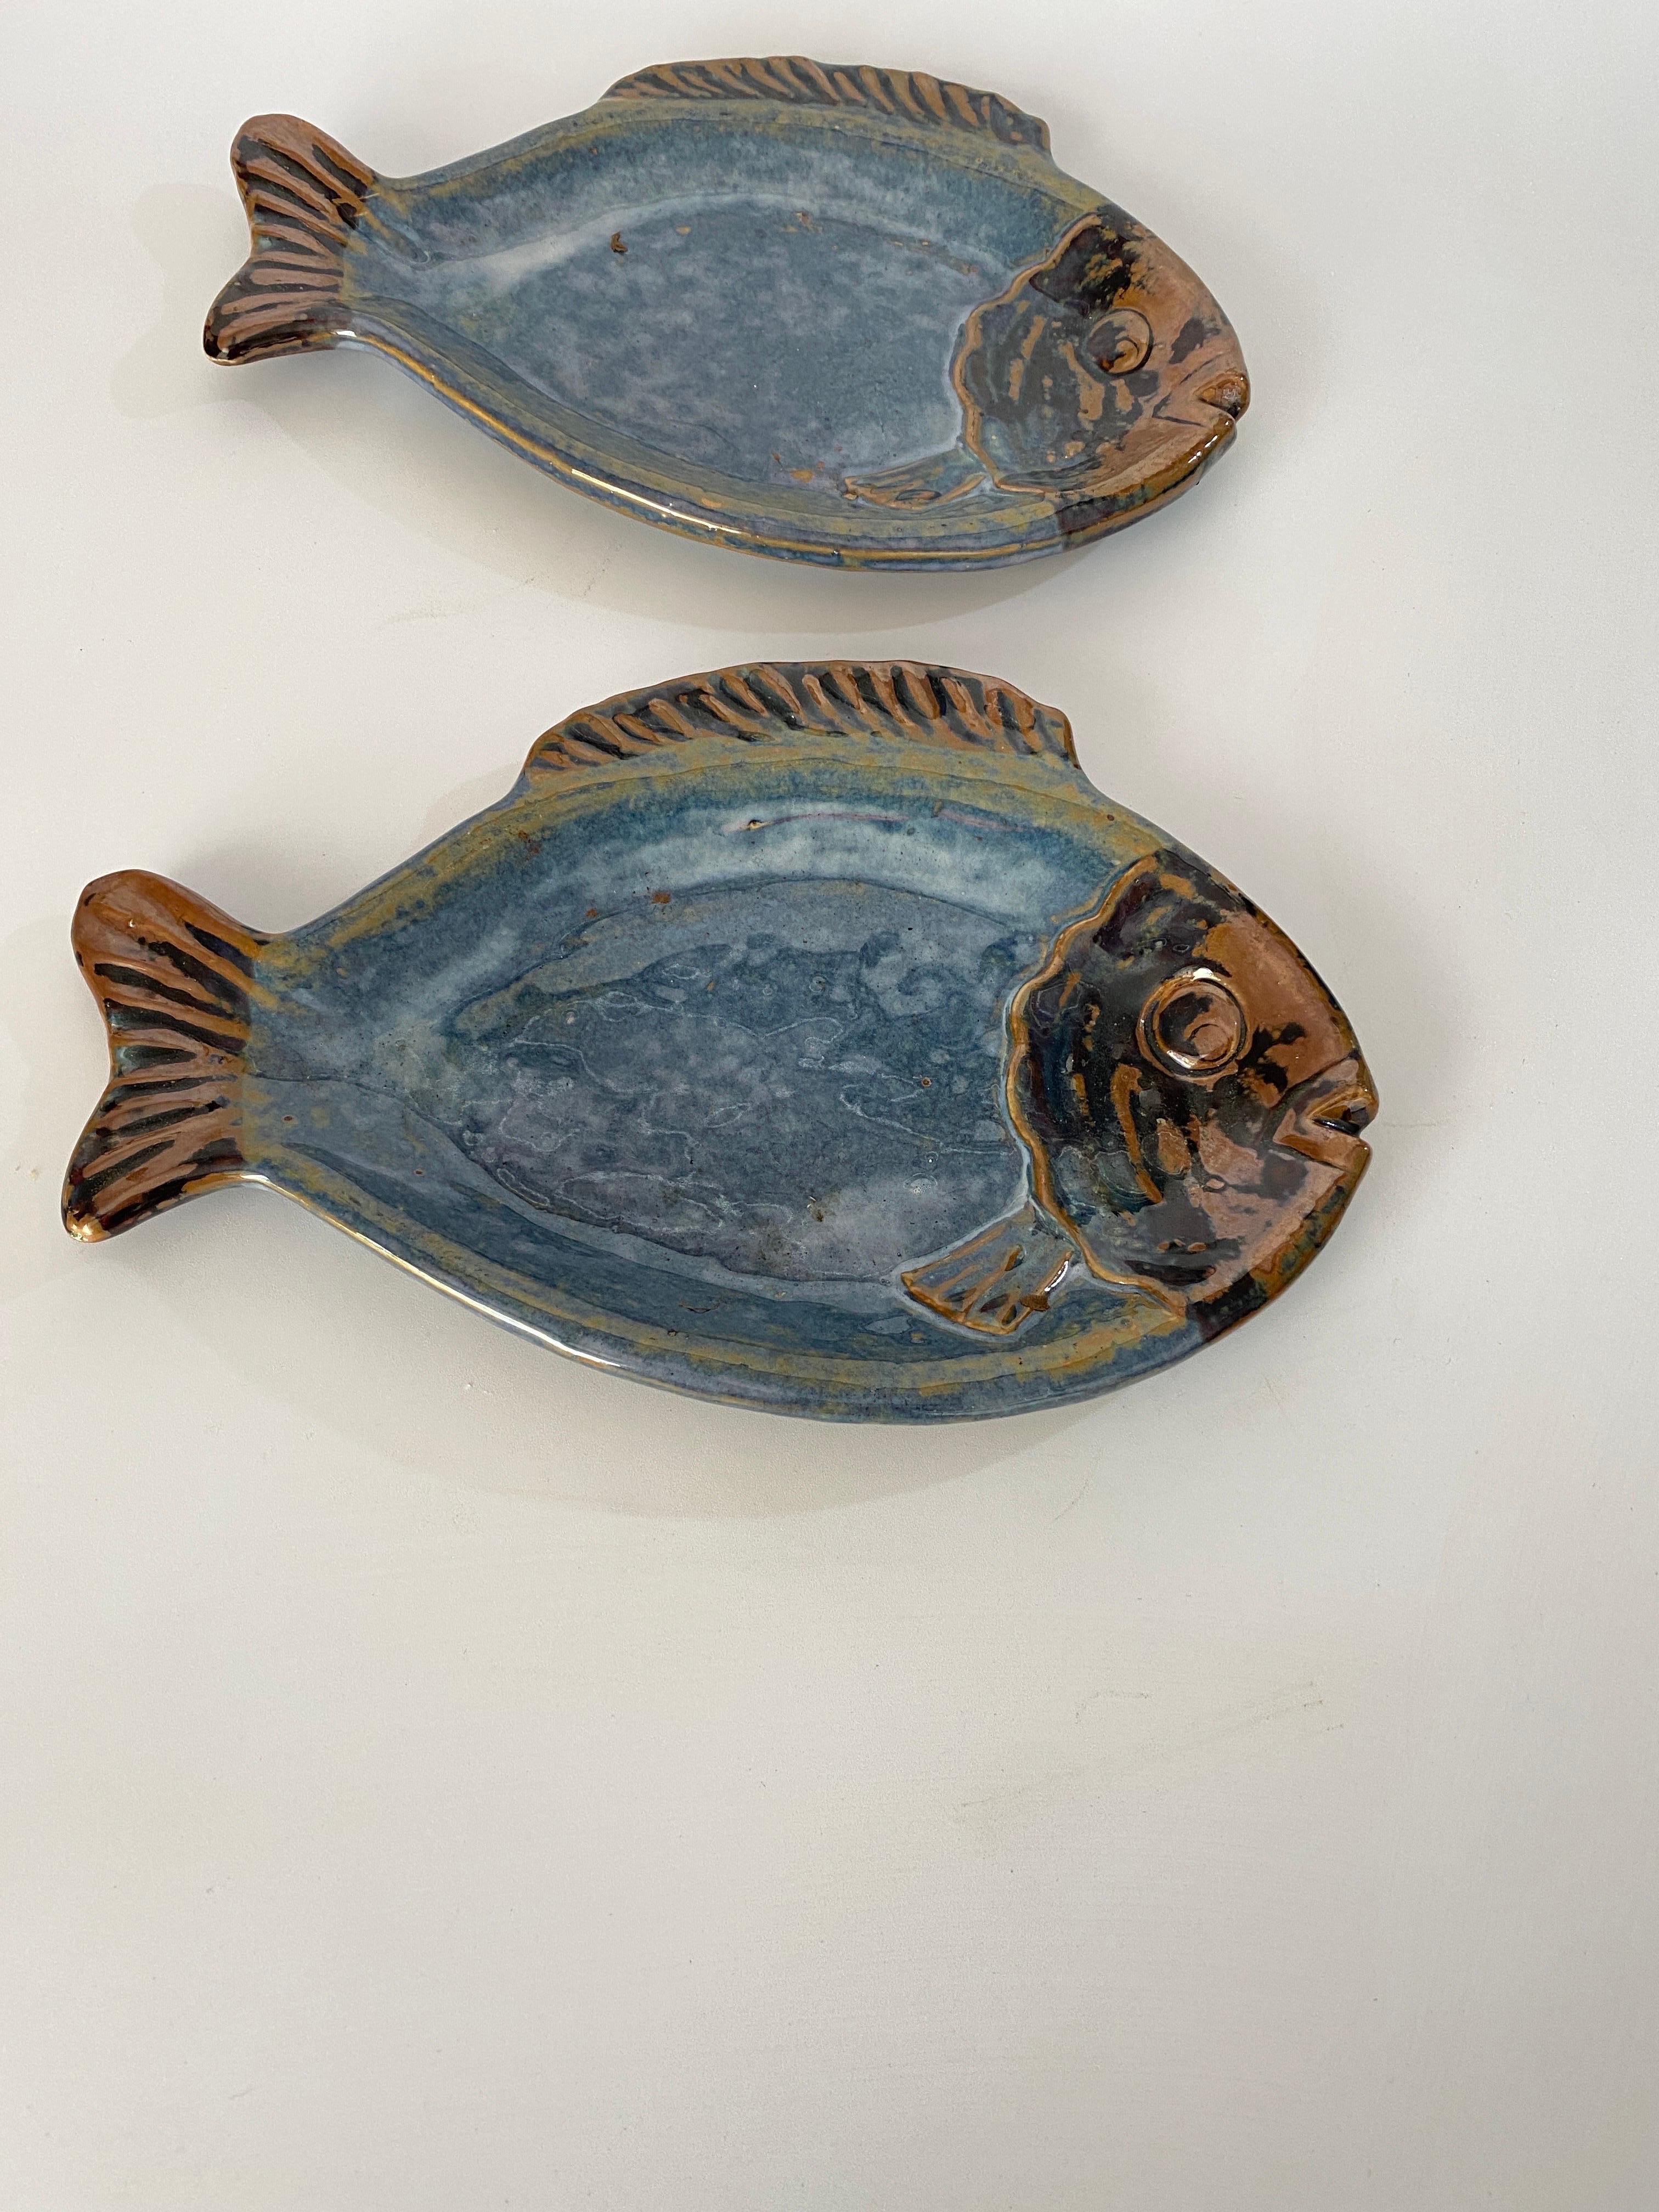 Pair of small Ceramic dishes. Blue in color verging on grey. They can be used as a dish or as a vide poche. They were made in France in the 1960s, they are in good condition.